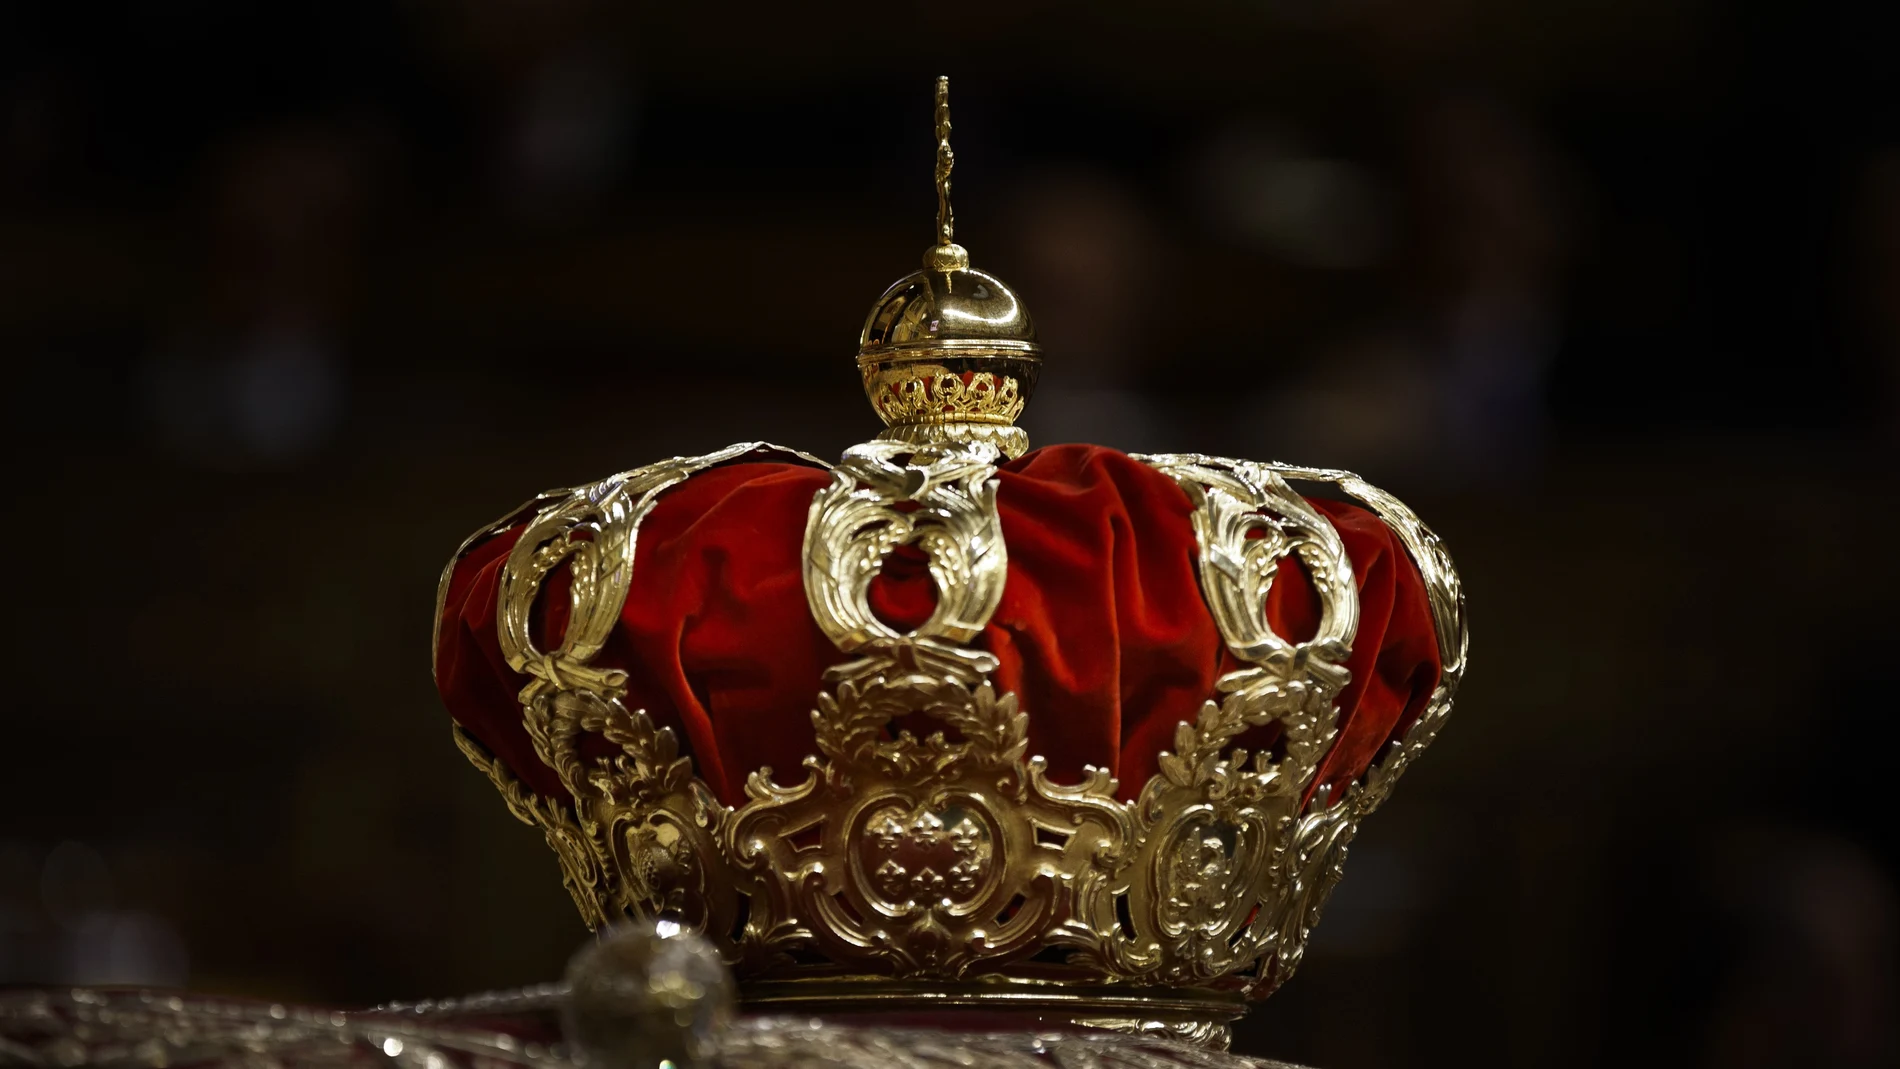 Spain's King's Crown is seen during the swearing-in ceremony of Spain's King Felipe VI at the Spanish Parliament, on Thursday, June 19, 2014. Felipe is being formally proclaimed monarch Thursday after 76-year-old King Juan Carlos abdicated so that younger royal blood can rally a country beset by economic problems, including an unemployment rate of 25 percent. Felipe was to swear an oath at a ceremony with lawmakers in Parliament in front of Spain's 18th-century crown and 17th-century scepter. (AP Photo/Daniel Ochoa de Olza)